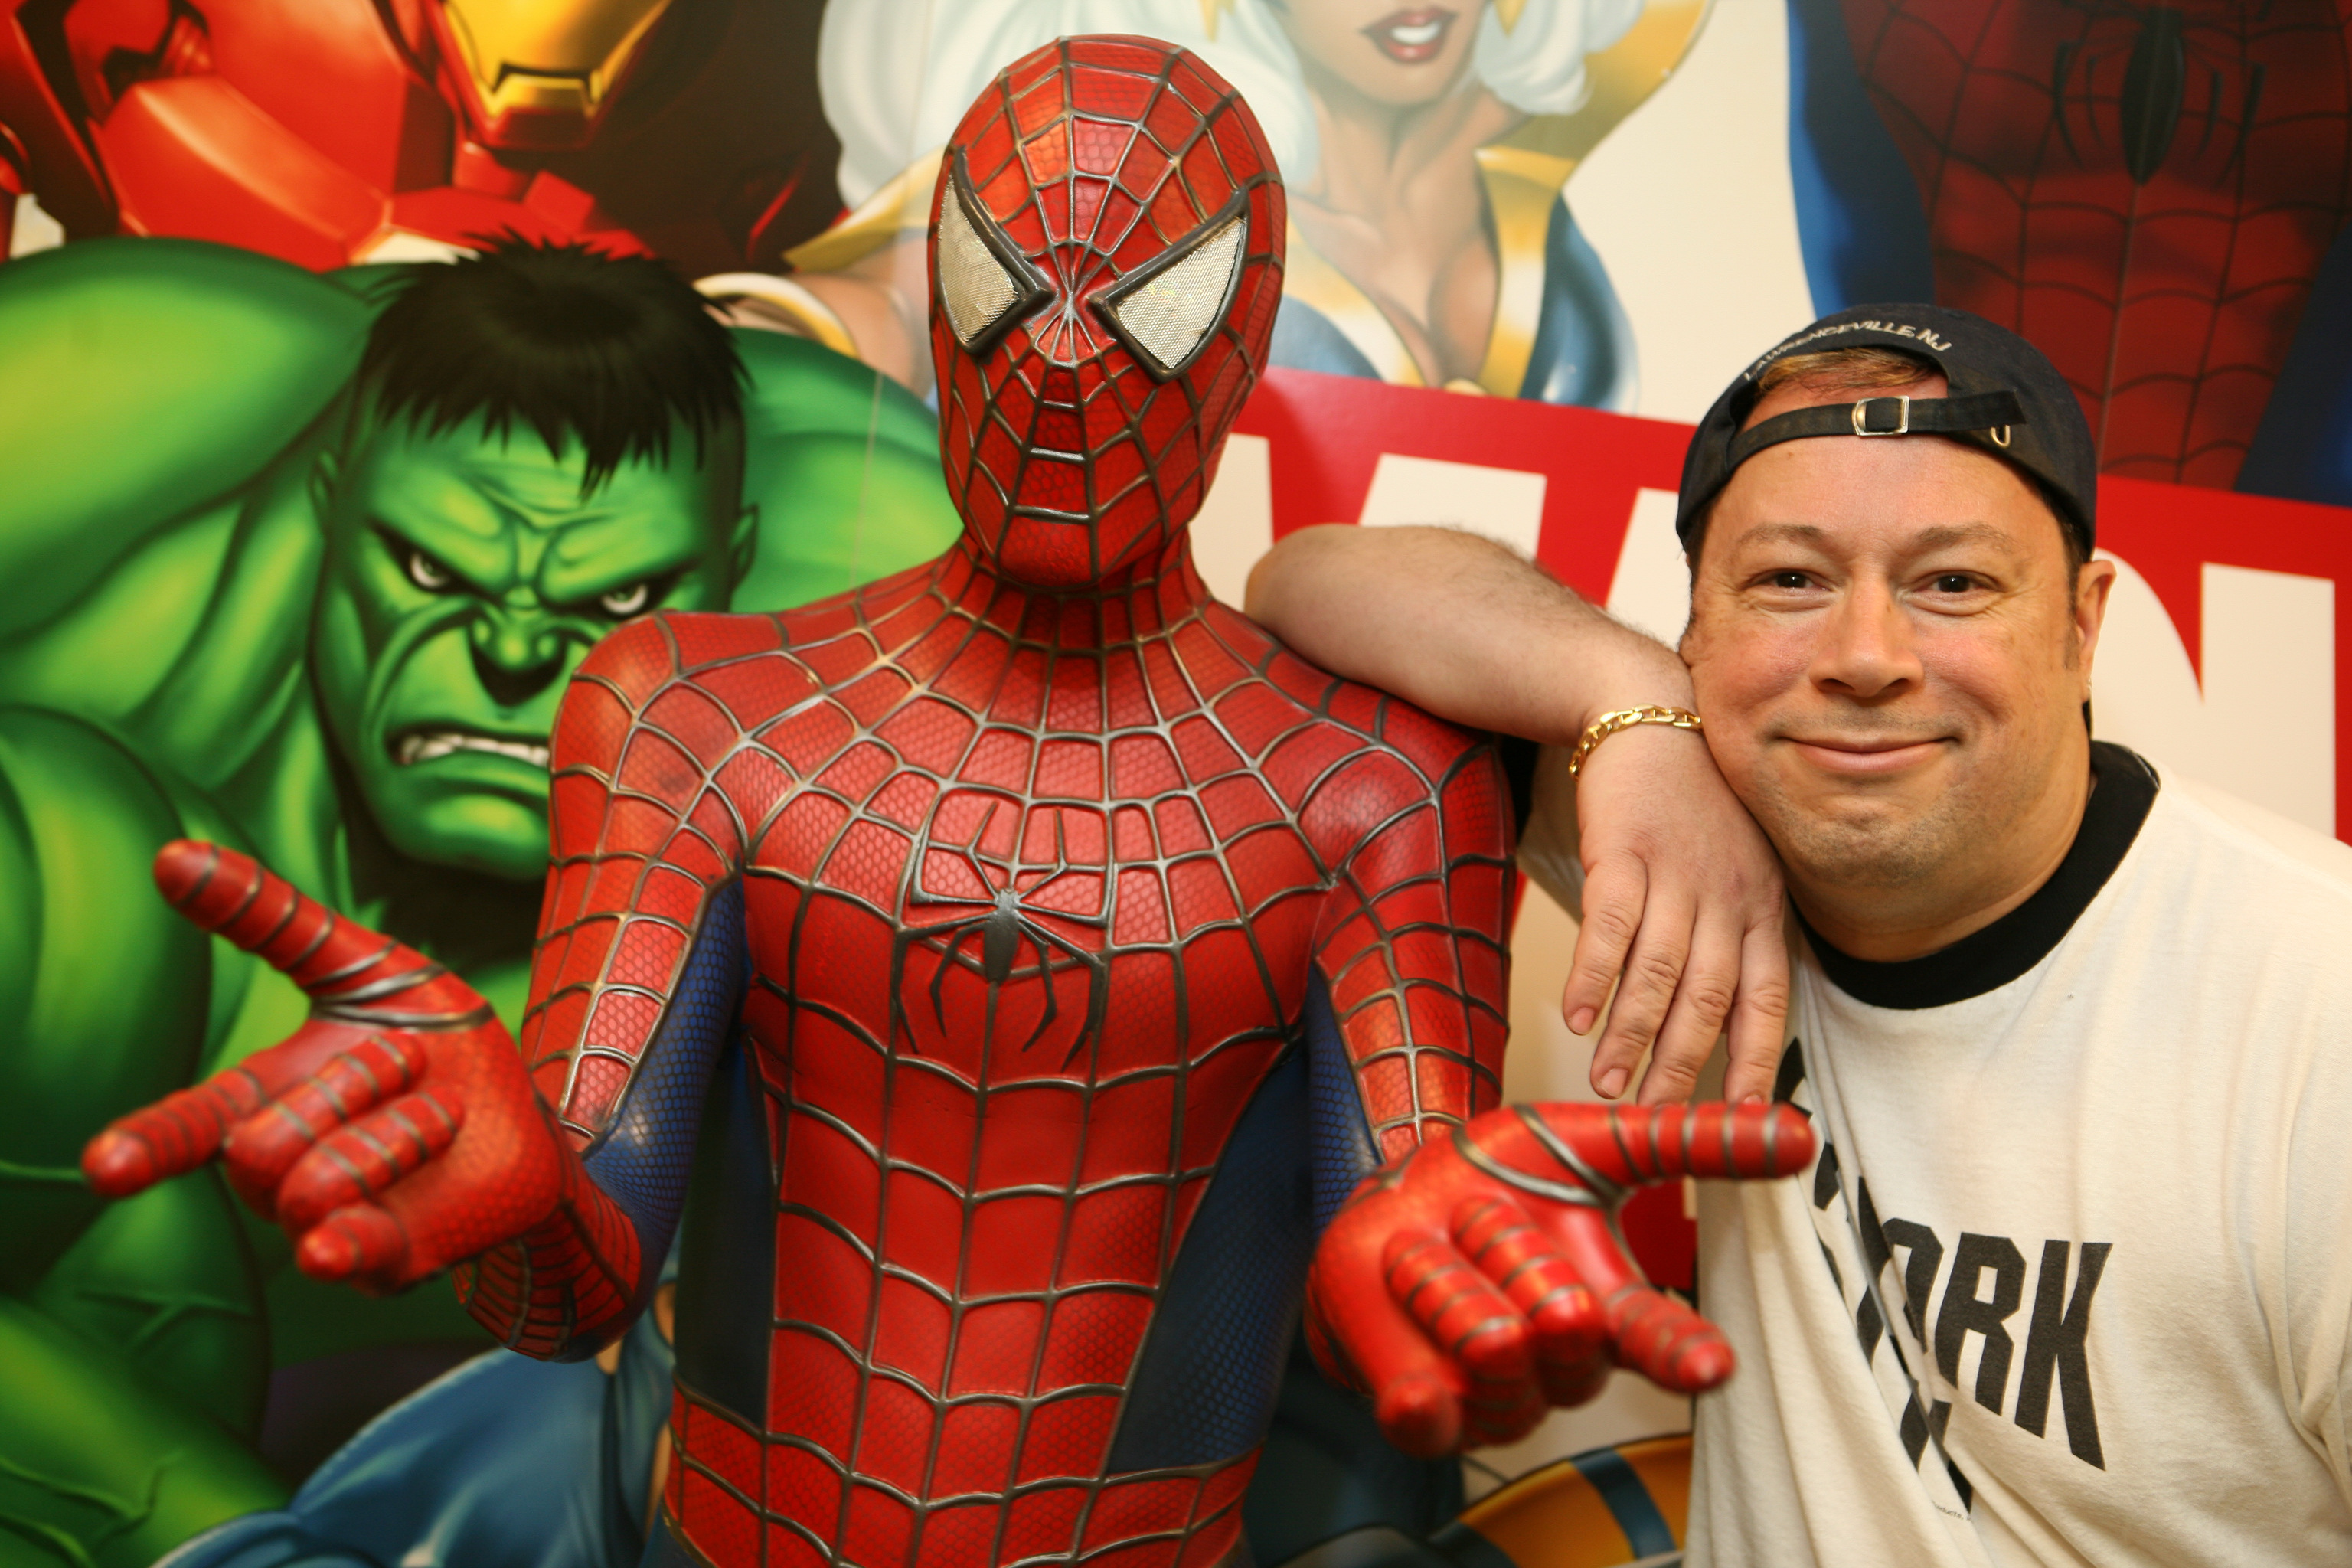 UNITED STATES - APRIL 24: Joe Quesada, Marvel Entertainment's editor in chief, leans on a statue of Spider-Man at Marvel's offices at 417 5th Avenue. (Photo by Enid Alvarez/NY Daily News Archive via Getty Images)